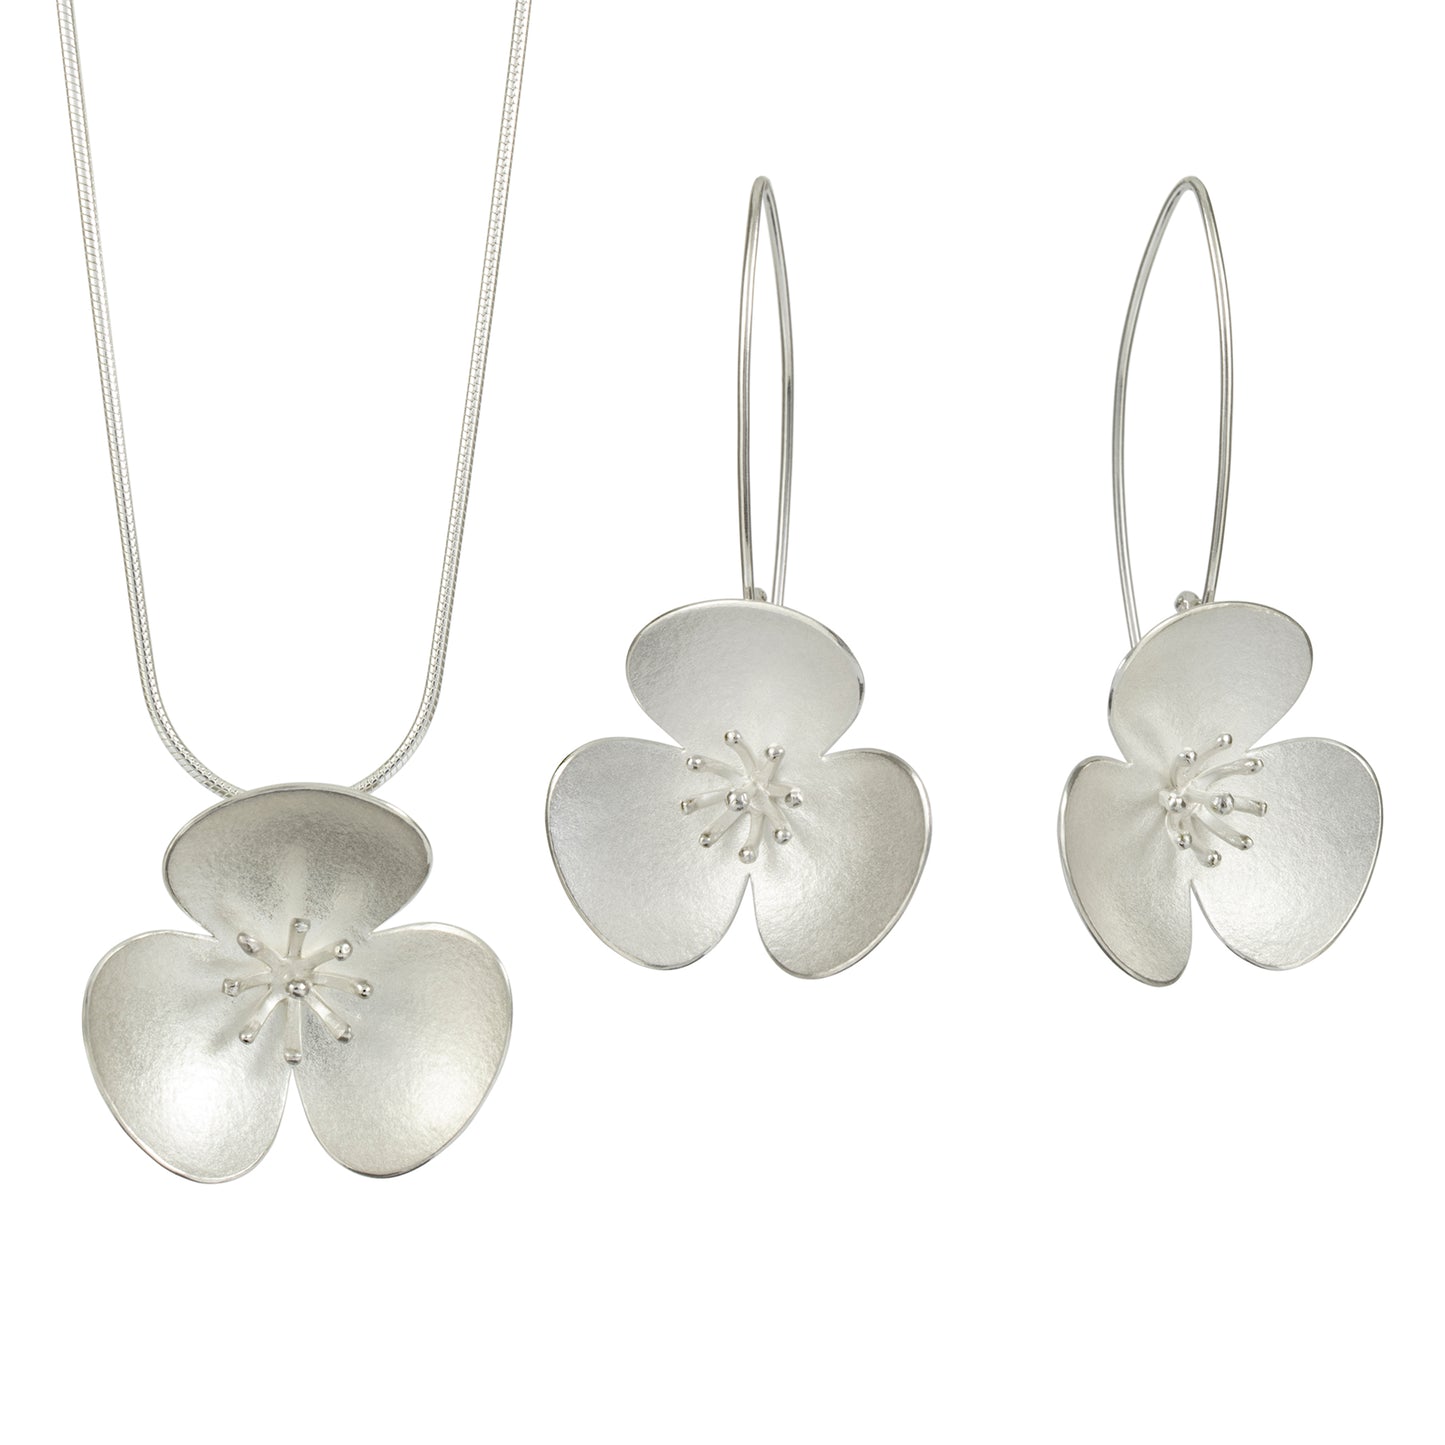 Three Silver Poppies Bridal Barette Hairclip, which instantly convert to a set of jewellery